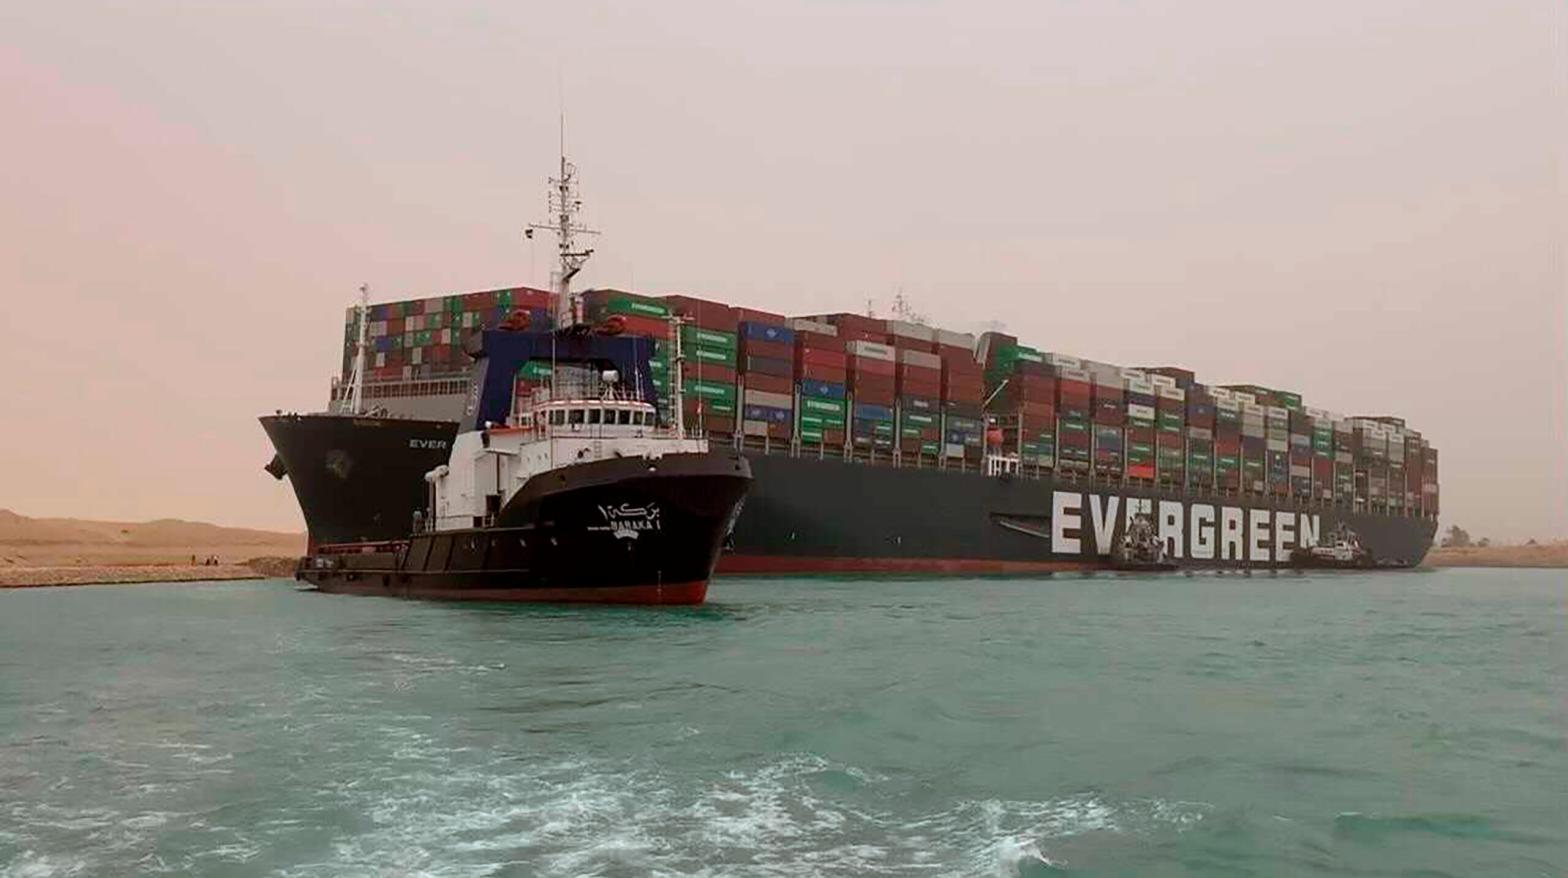 A boat navigates in front of the Ever Green, which turned sideways in Egypt's Suez Canal, blocking traffic in a crucial East-West waterway for global shipping. (Photo: Suez Canal Authority, AP)